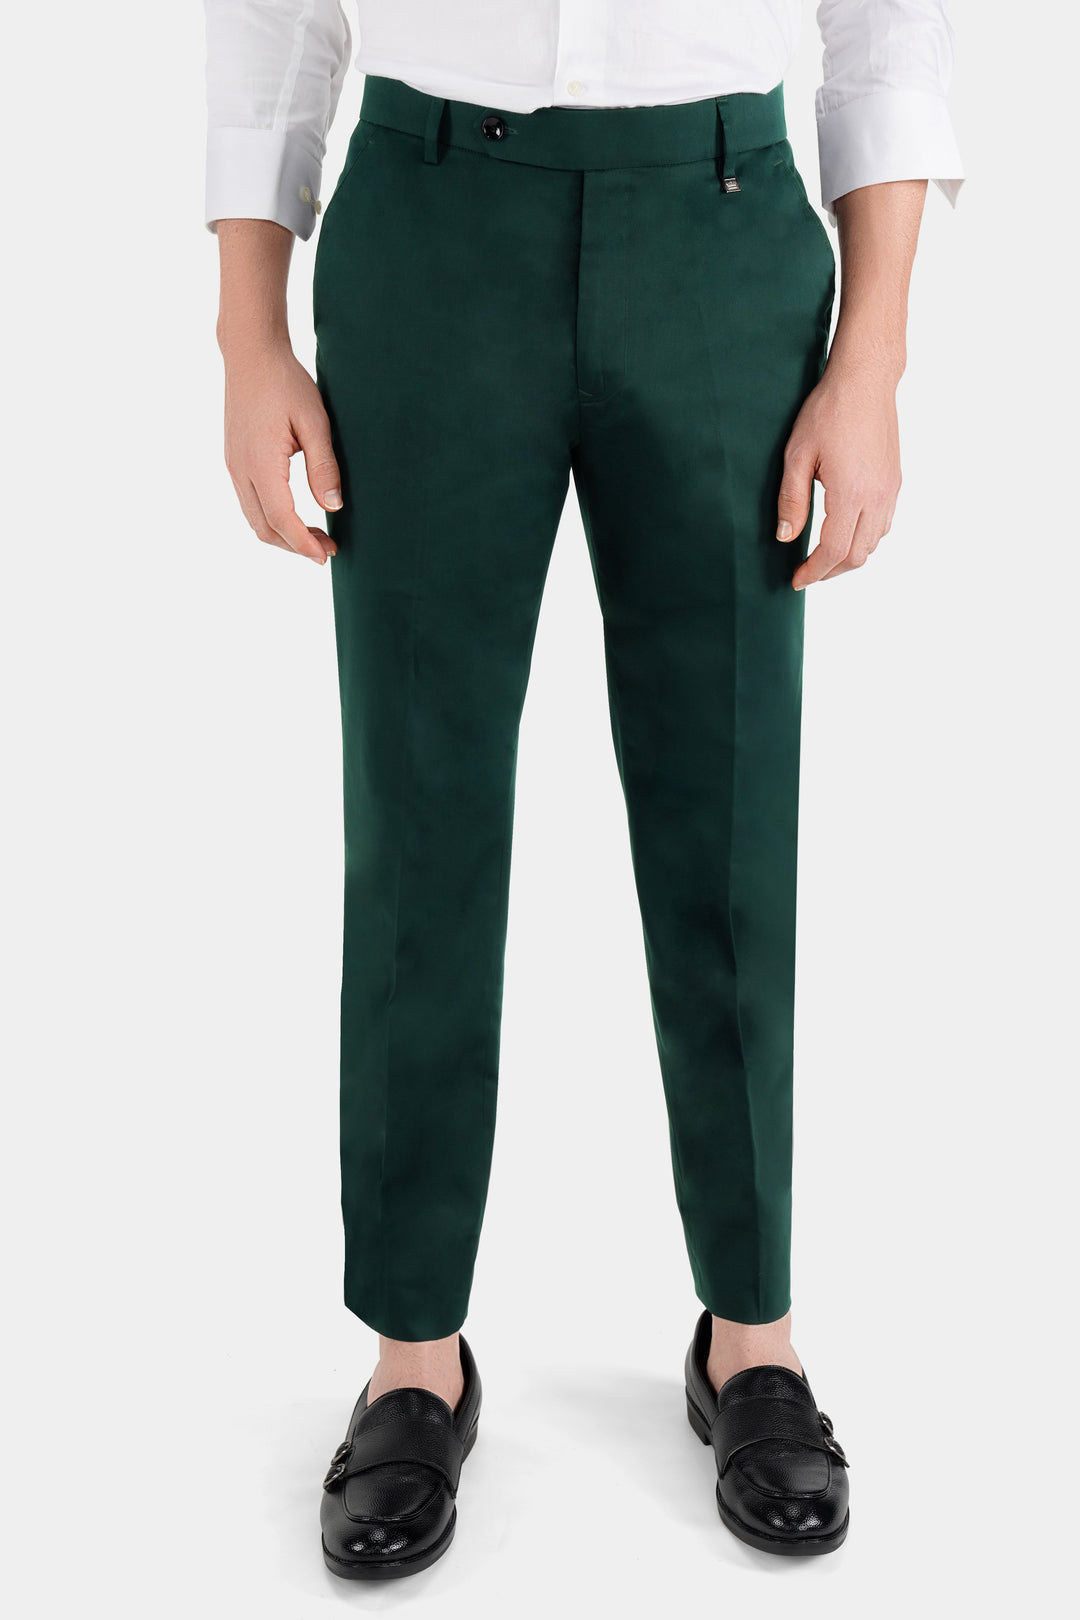 Go Colors Olive Green Formal Trousers: Buy Go Colors Olive Green Formal  Trousers Online at Best Price in India | Nykaa